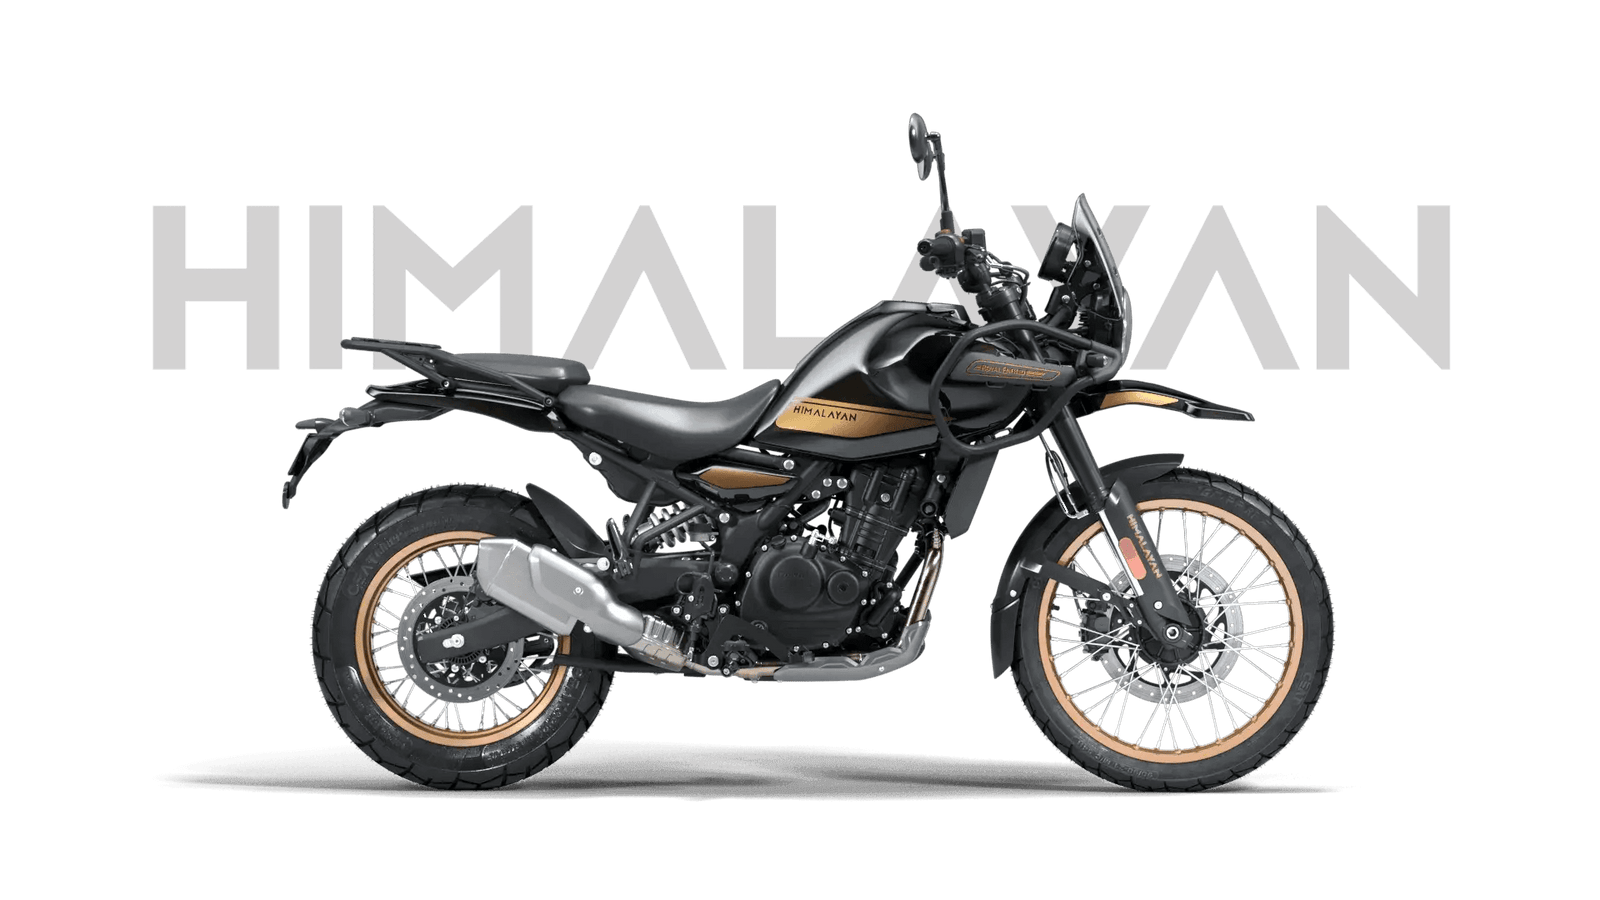 Royal Enfield Himalayan 450: The Upgraded Adventure Touring Motorcycle